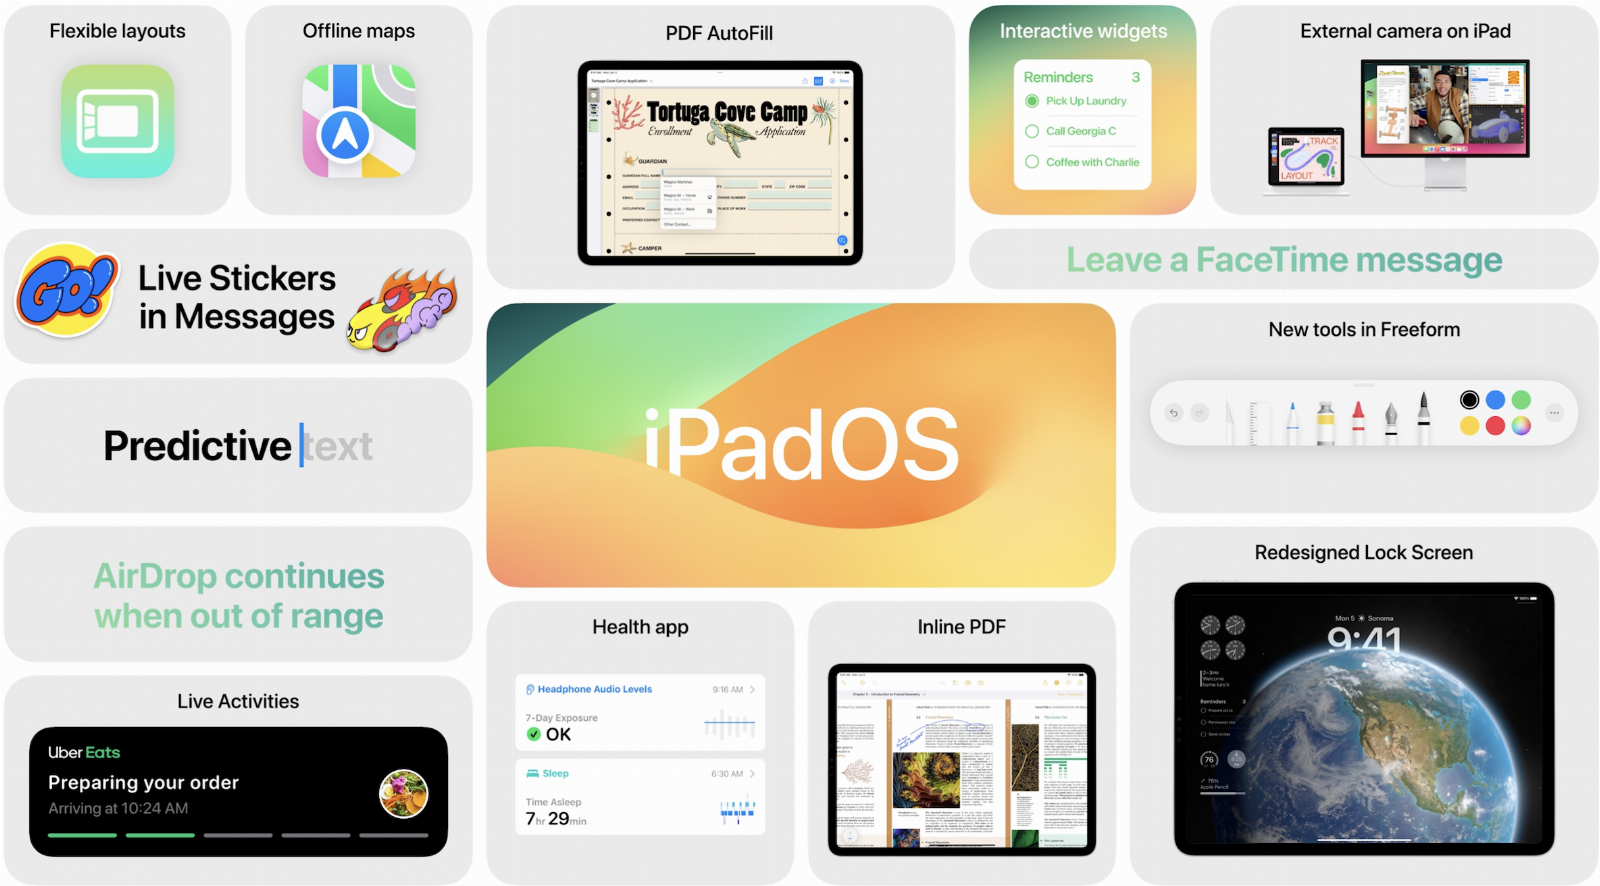 iPadOS 17 adds upgraded widgets, customizable Home Screen, and new native apps